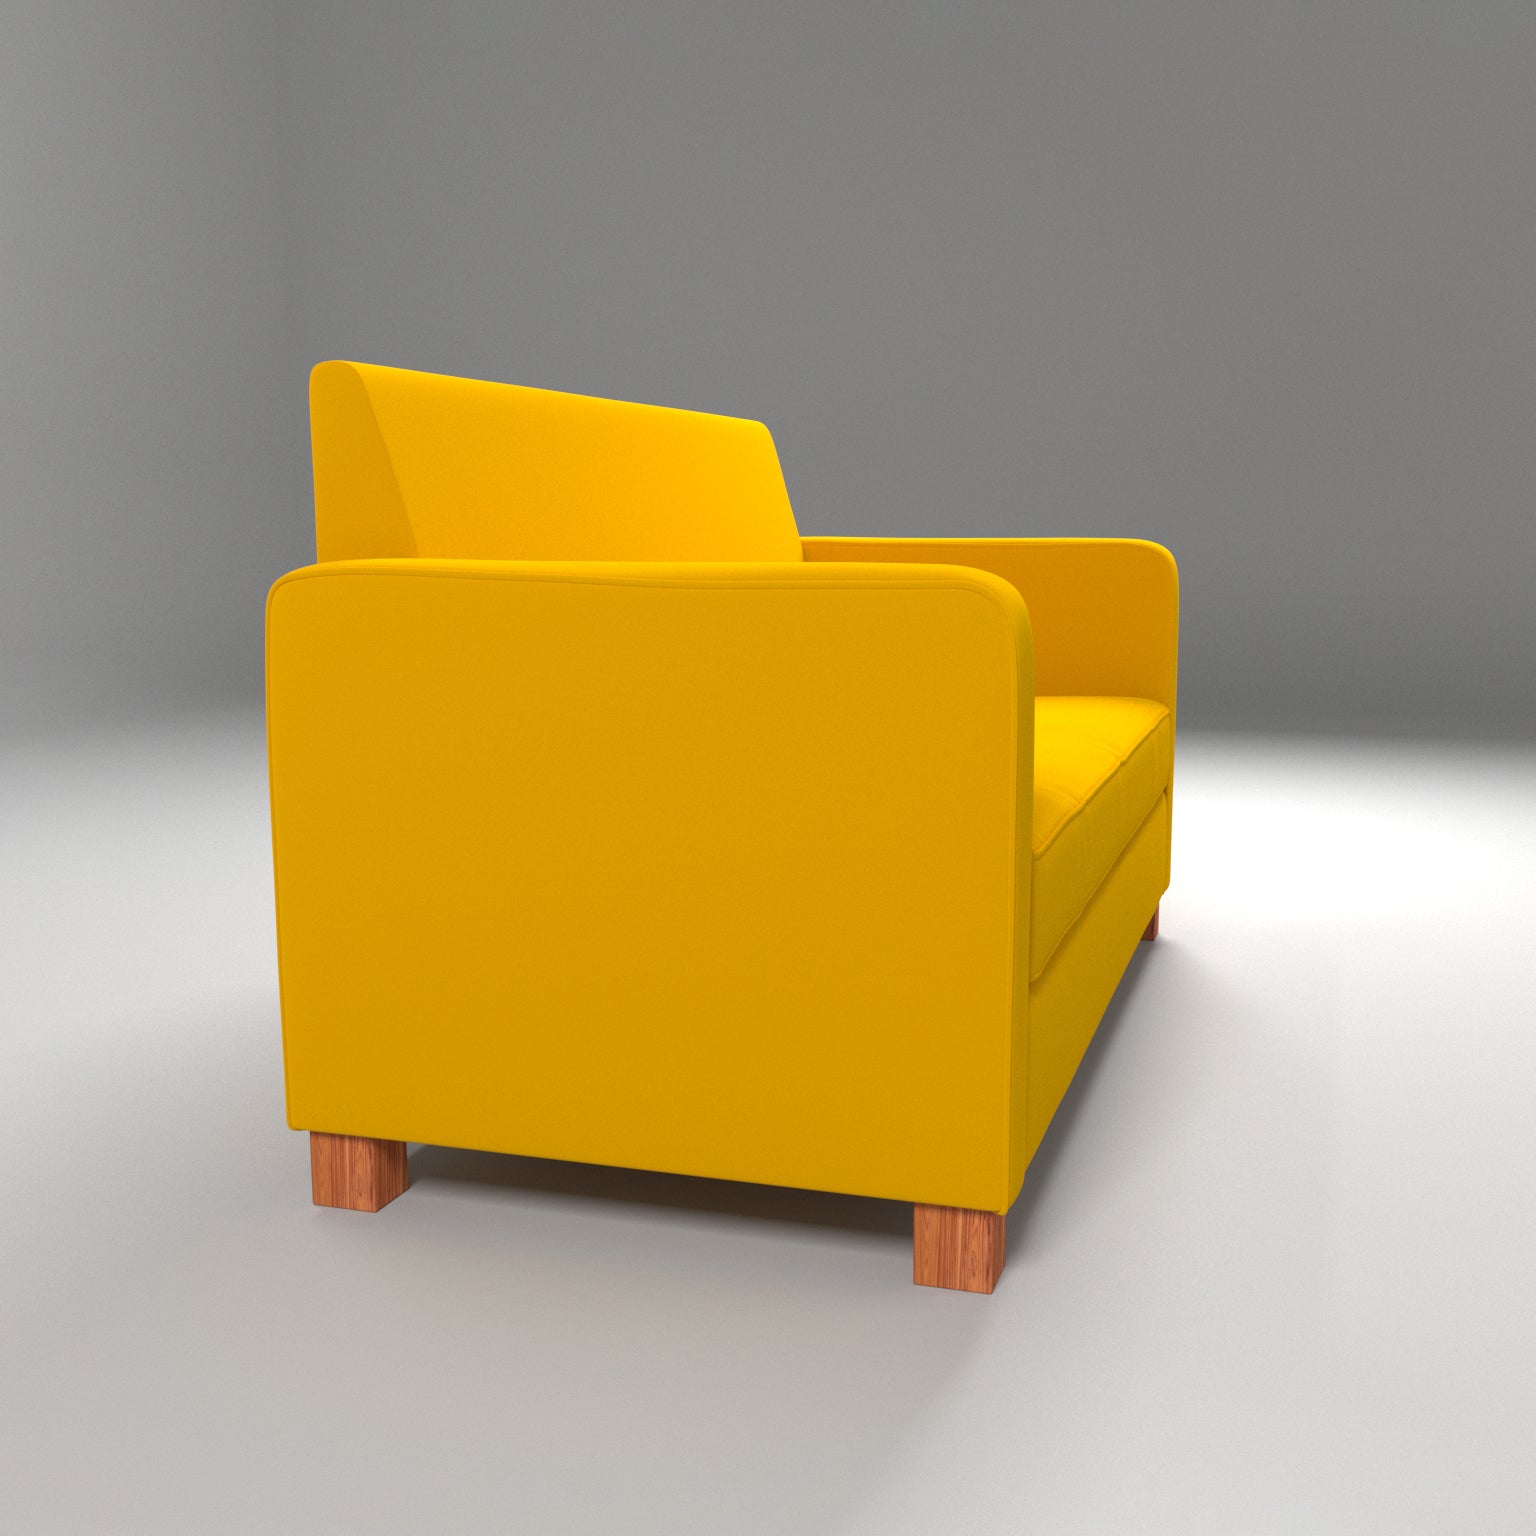 Double Seater Yellow Upholstered Sofa with 2 Cushions Sofa